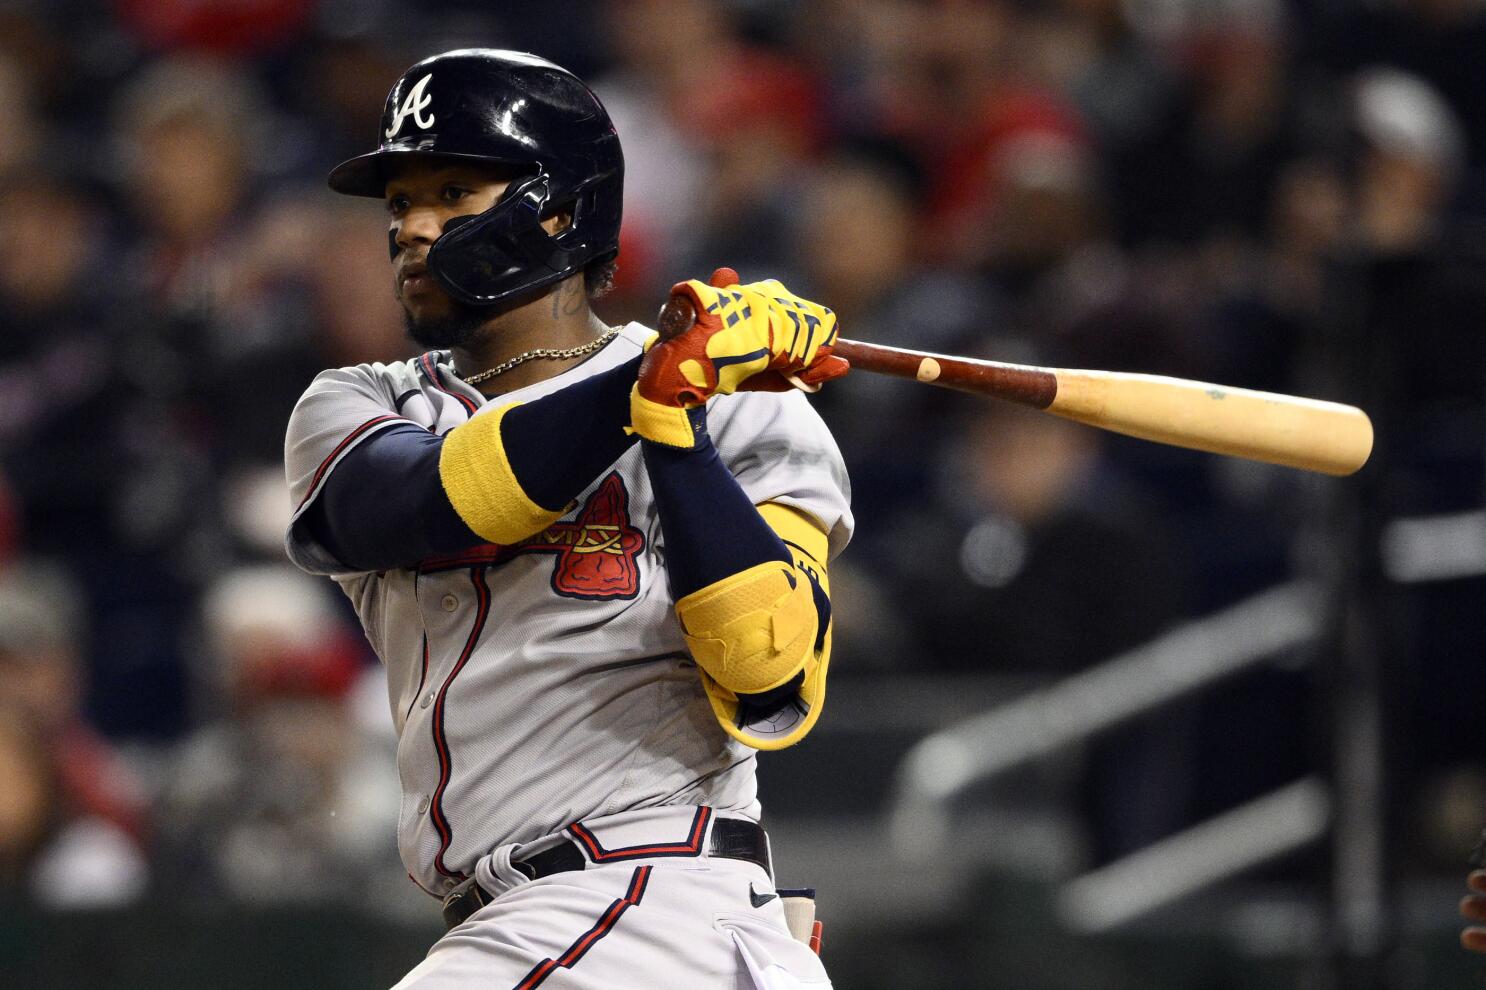 Braves will start Ronald Acuna Jr. in right field this season and